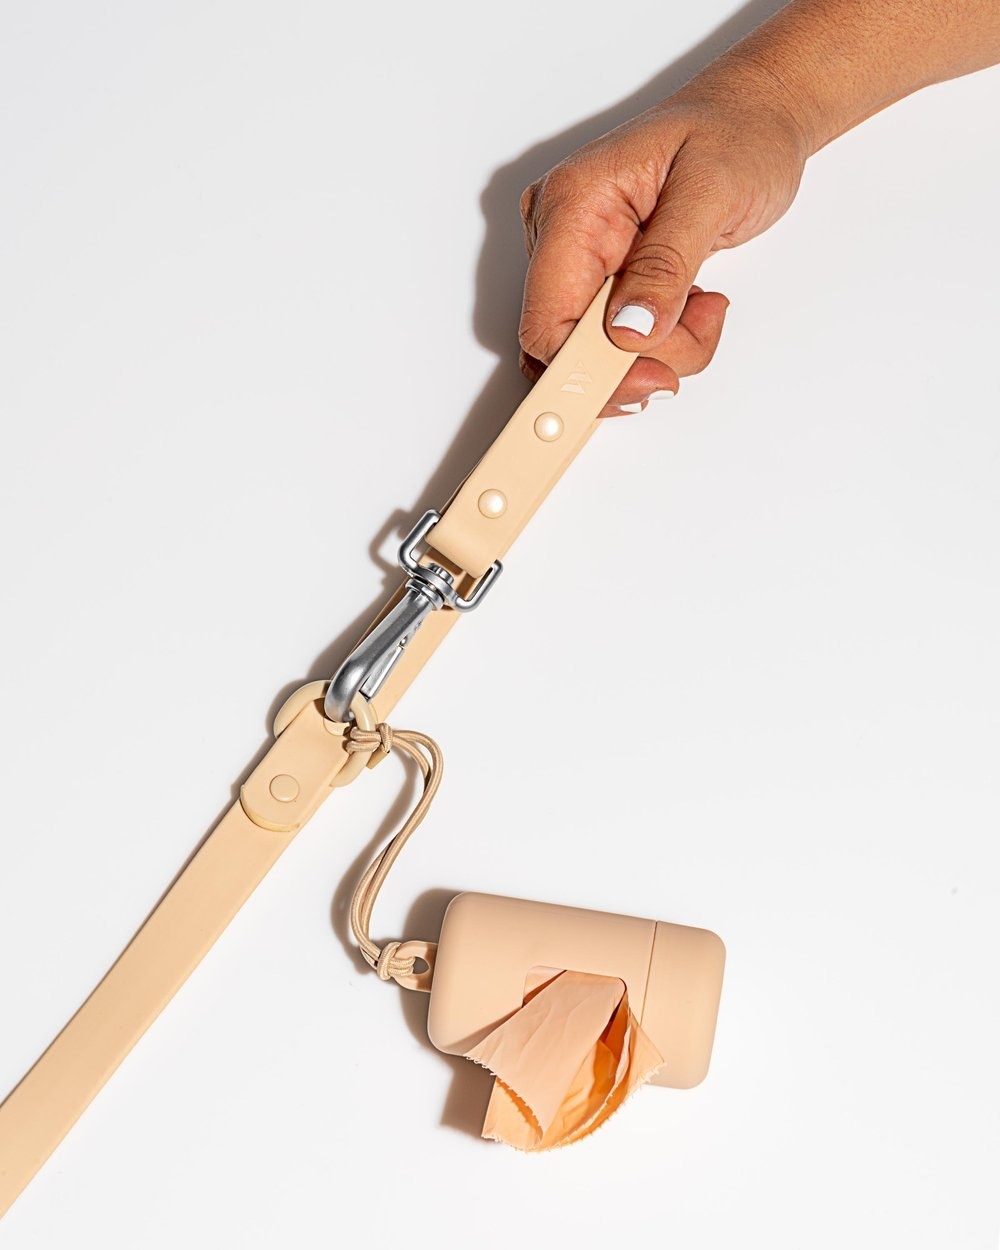 A peach-colored dog poop bag carrier connected to a leash.